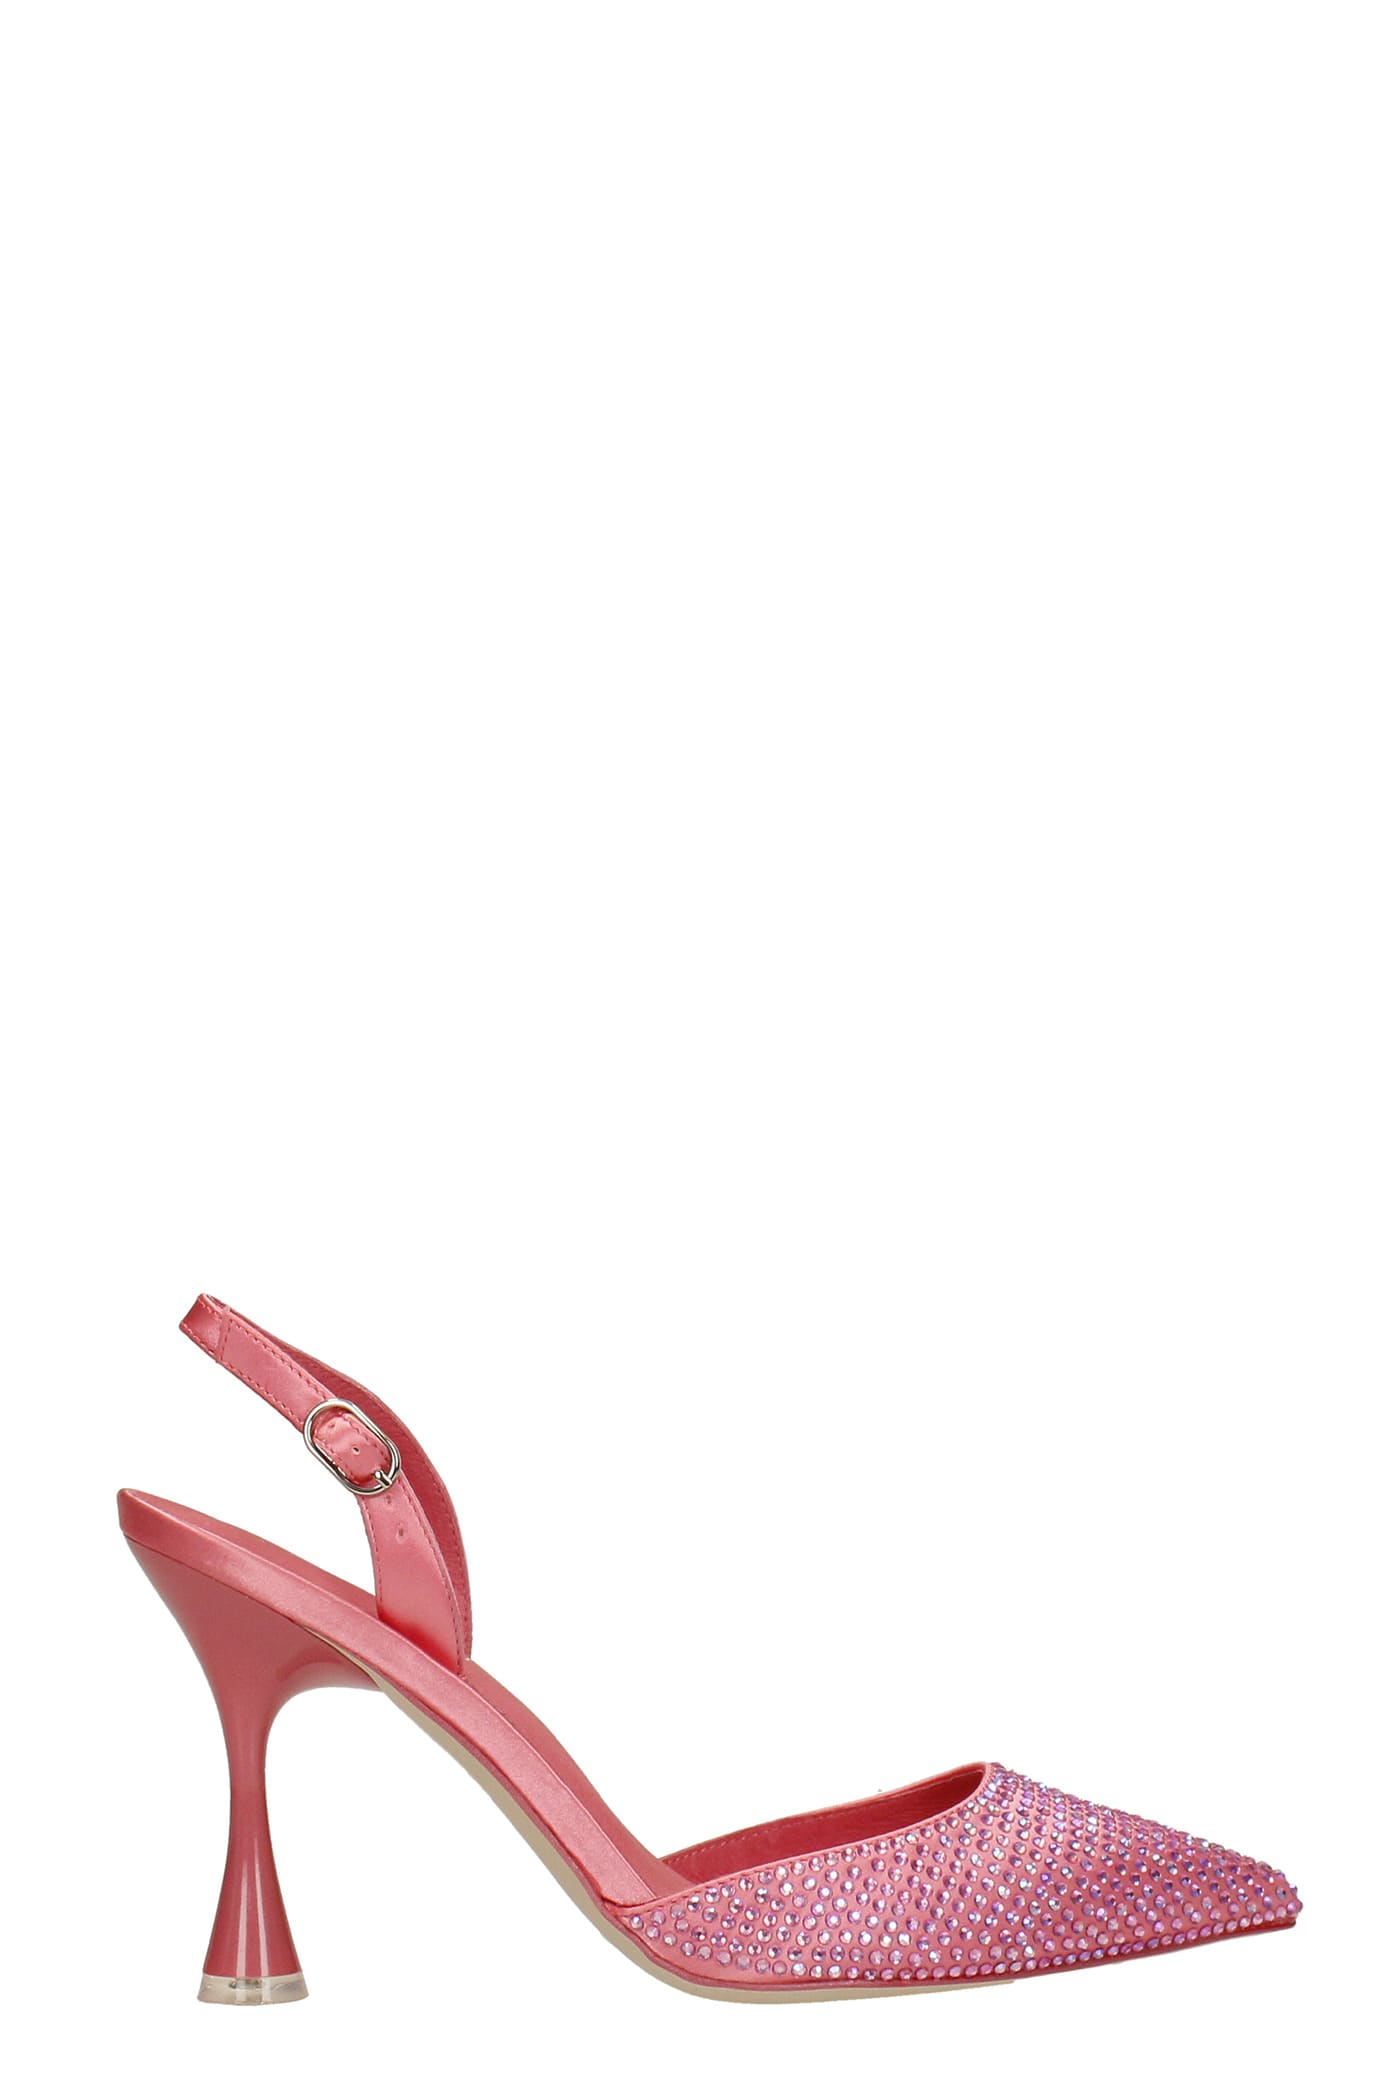 Jeffrey Campbell Zivote Pumps In Rose-pink Satin